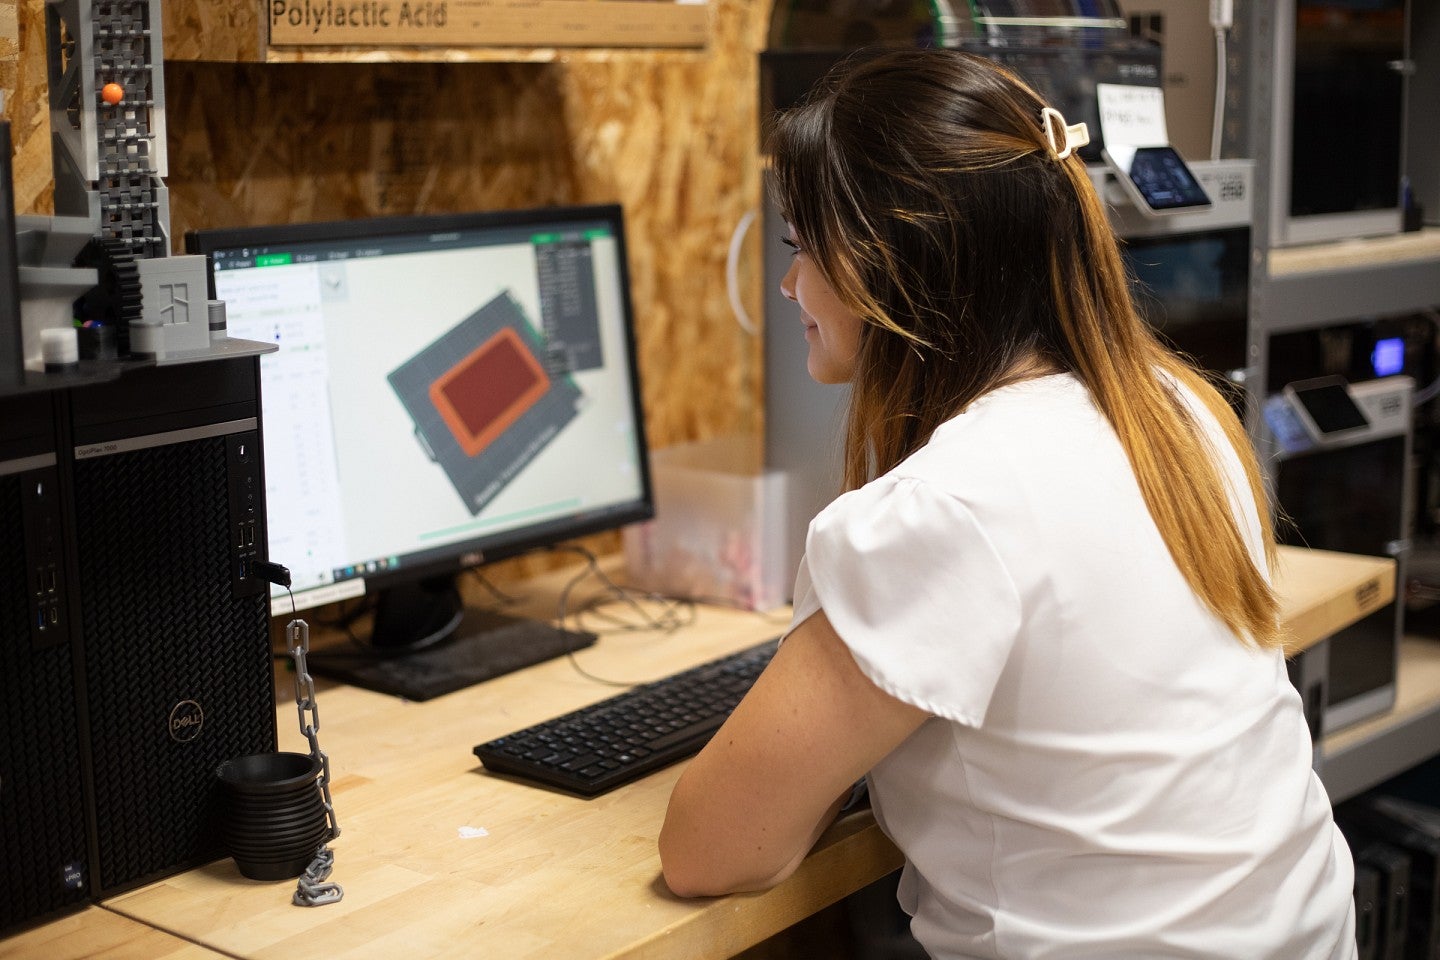 student in design lab at computer, working with graphic models on screen